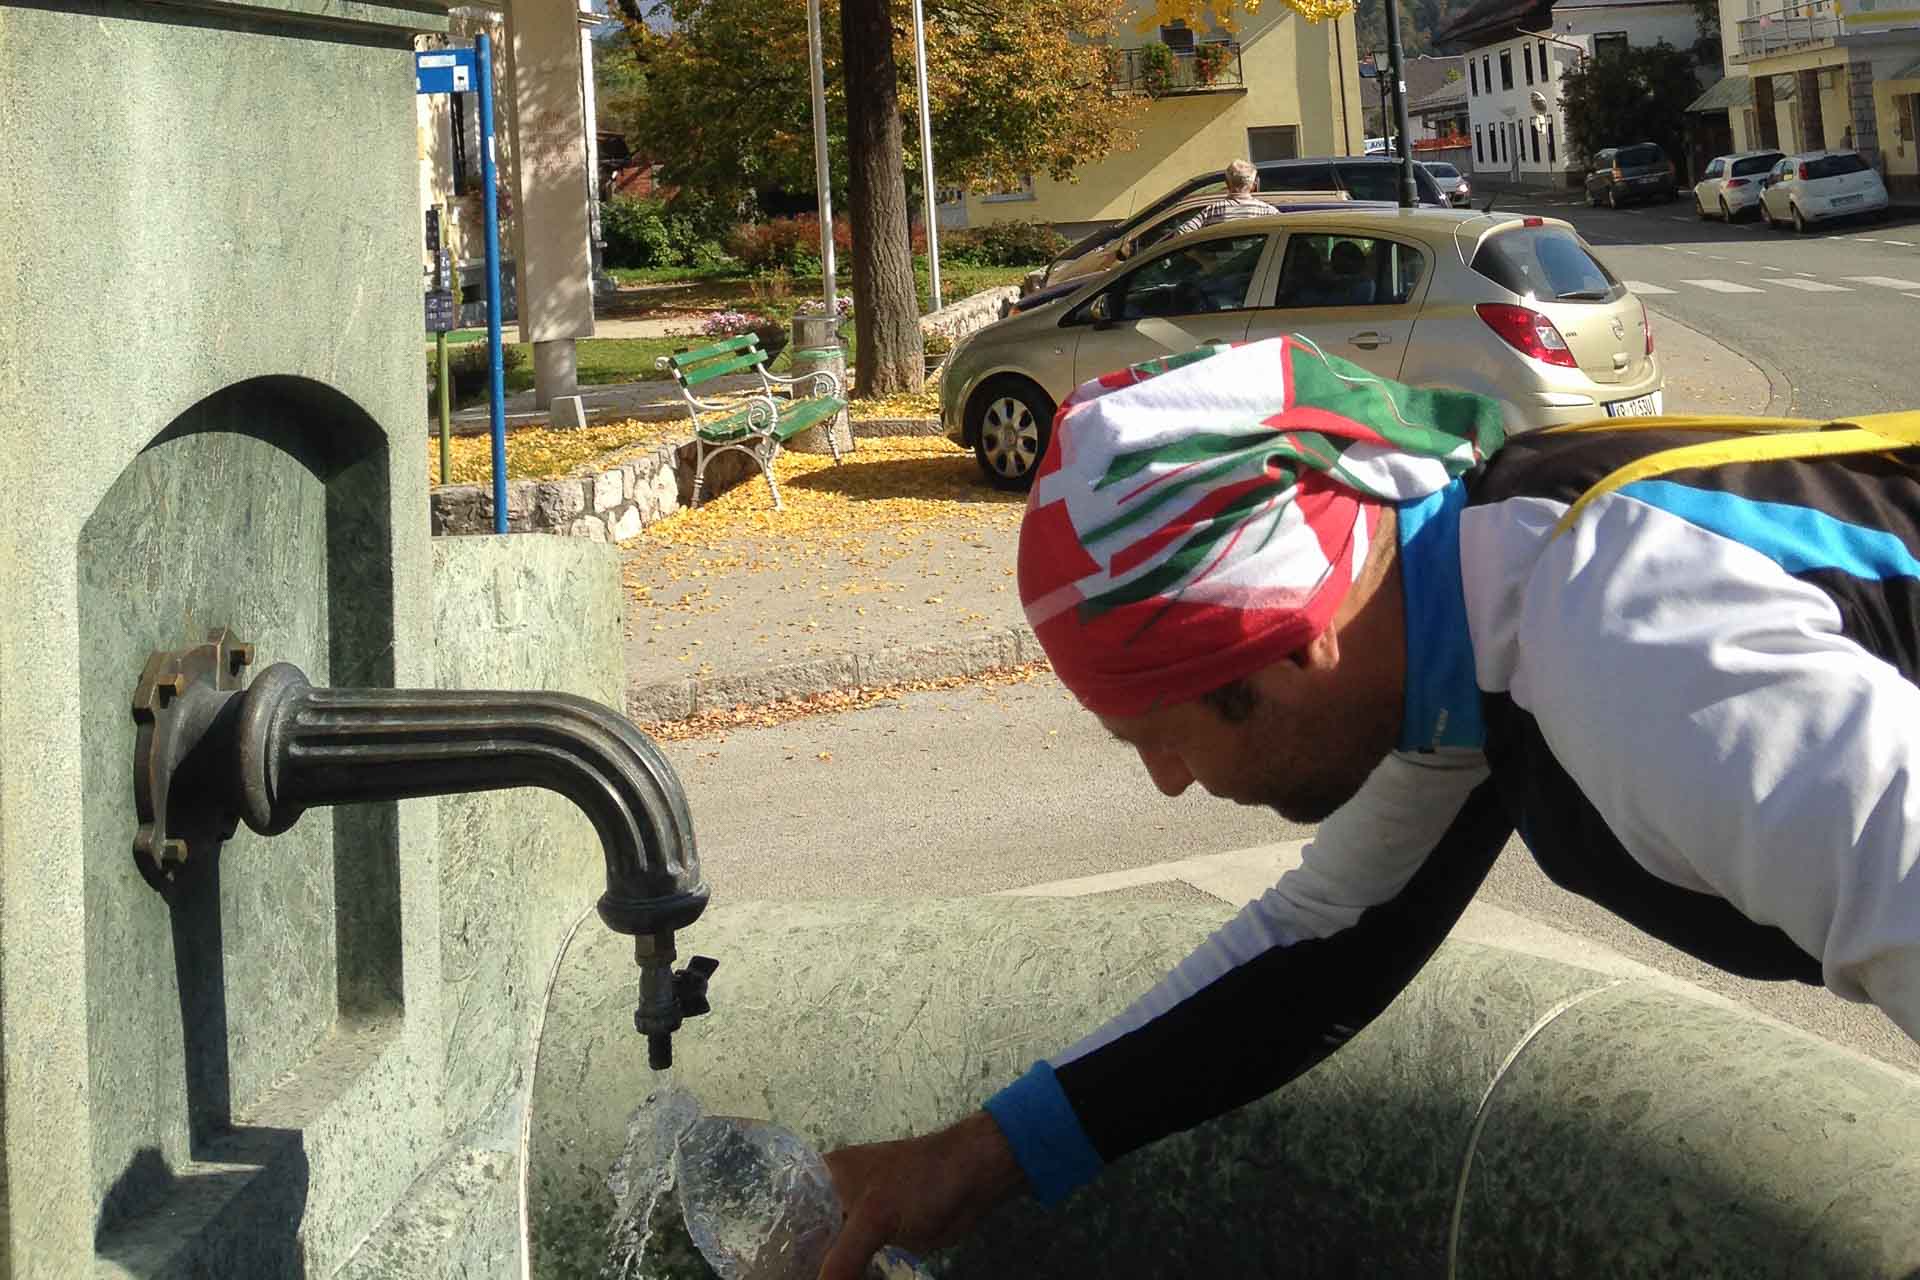 Tiago filling up his water bottle in the city in Slovenia